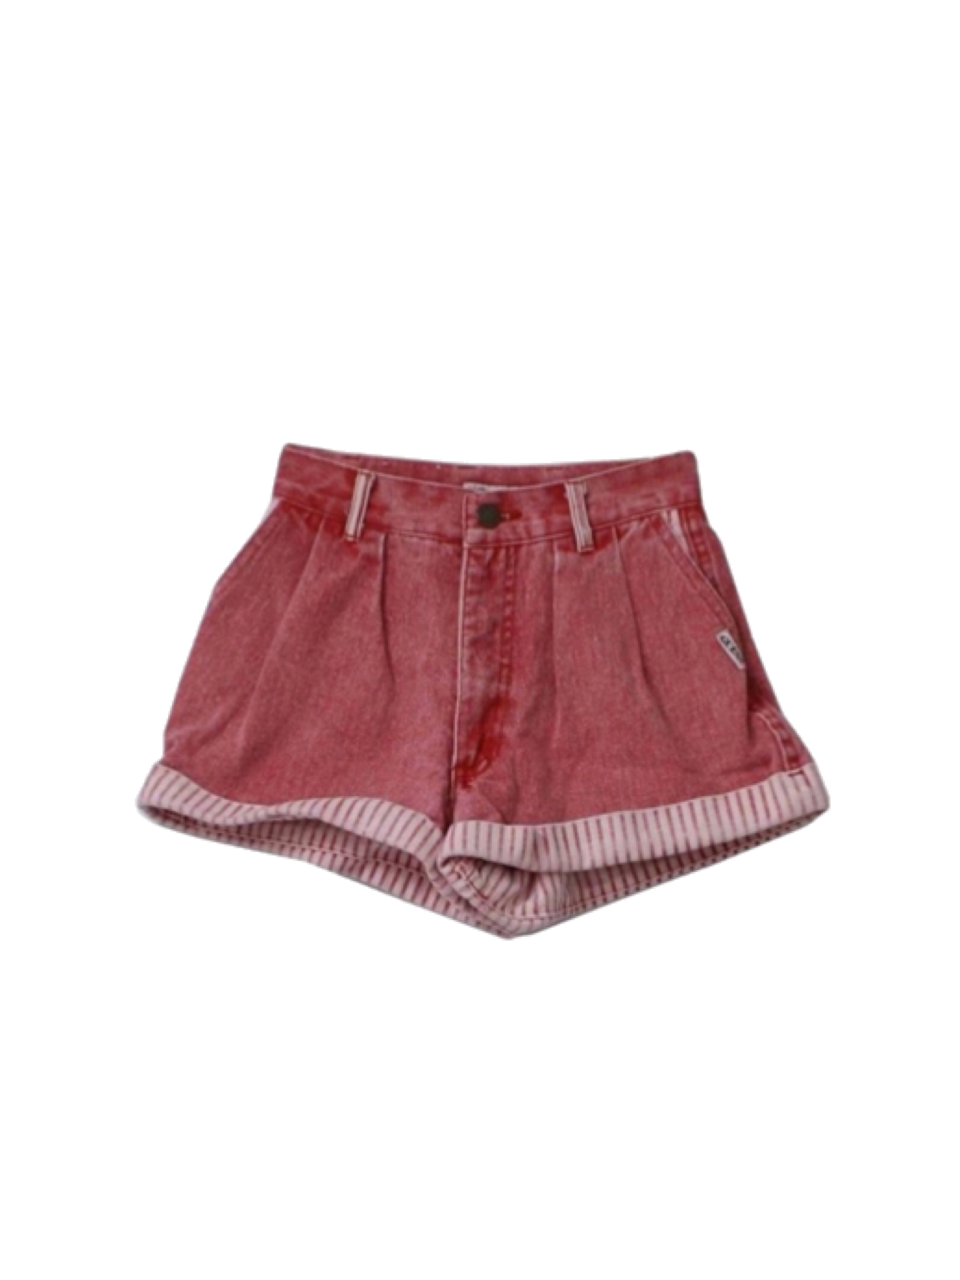 Shorts Denimshorts Jeanshorts Red Sticker By Icypuppies